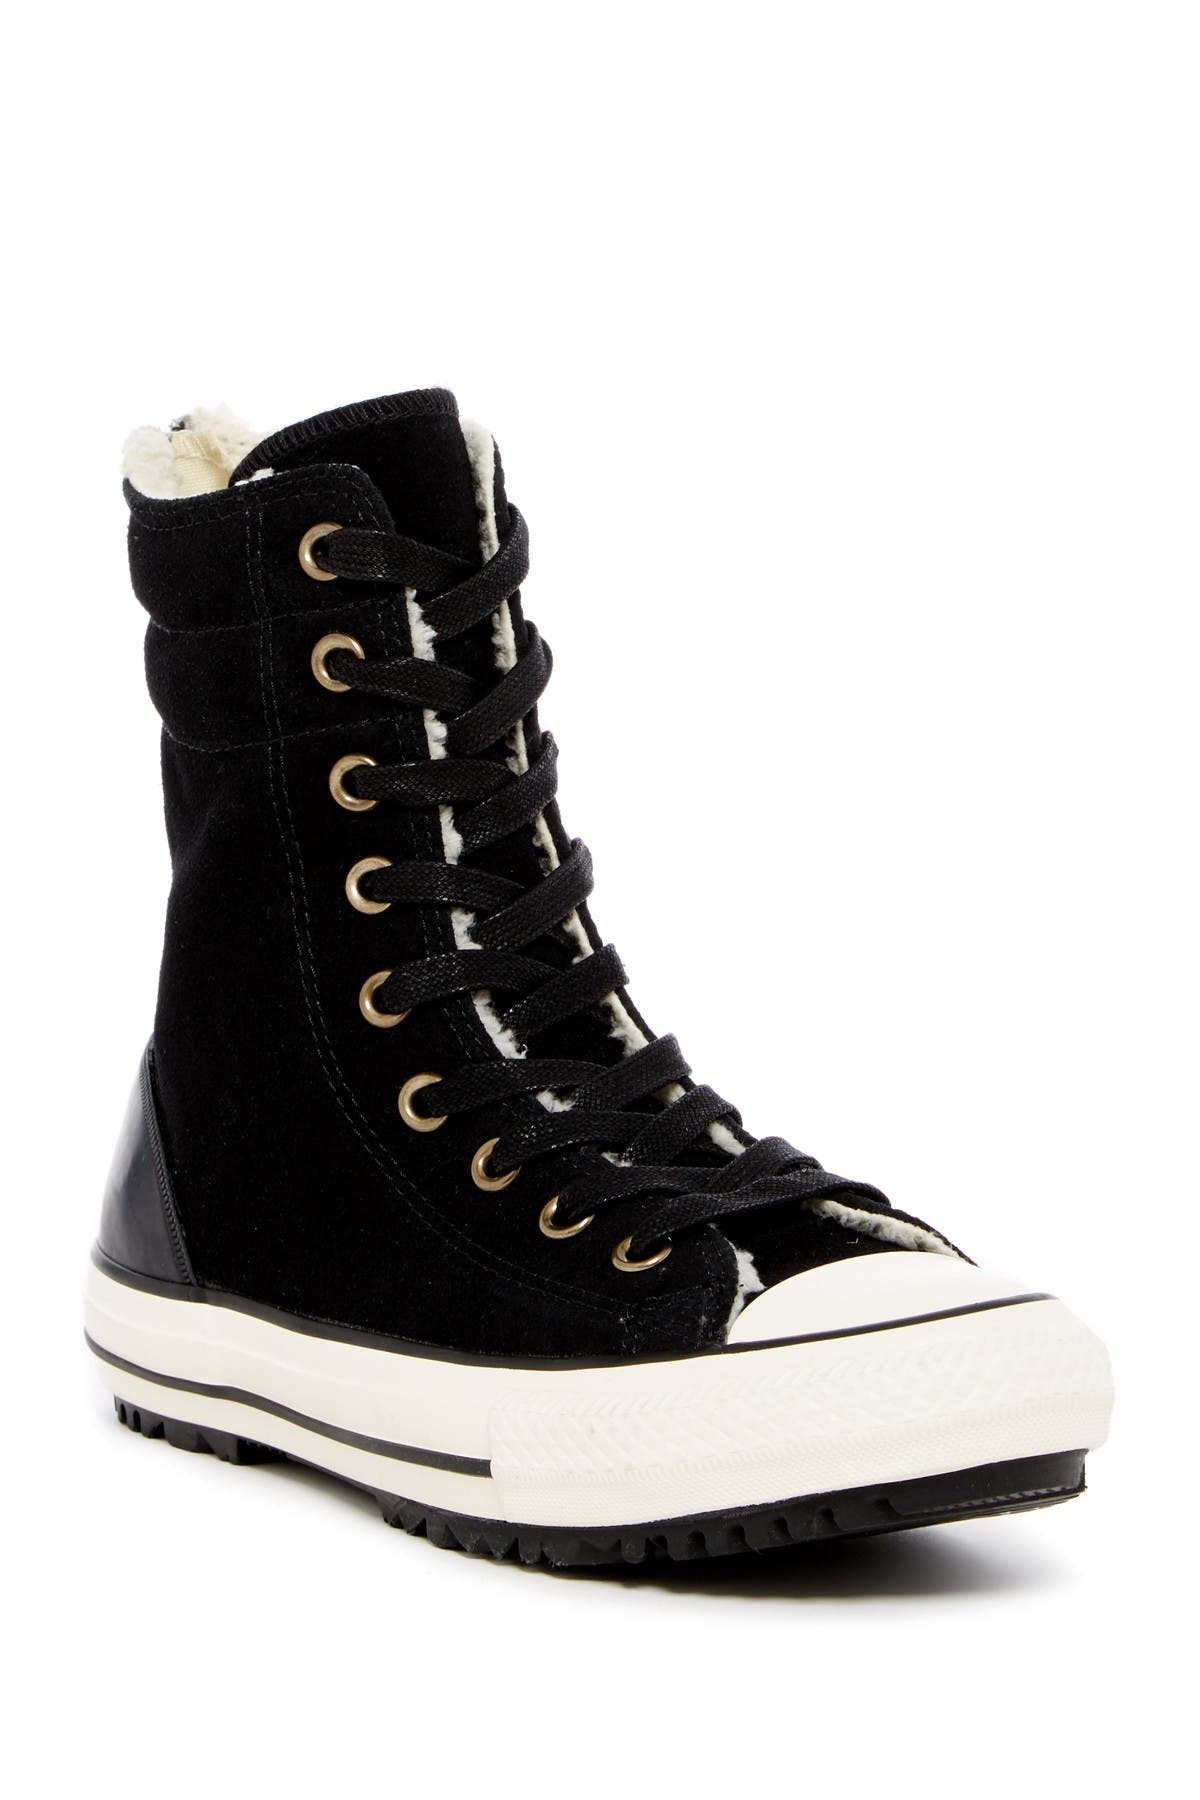 converse chuck taylor all star leather and faux shearling high rise